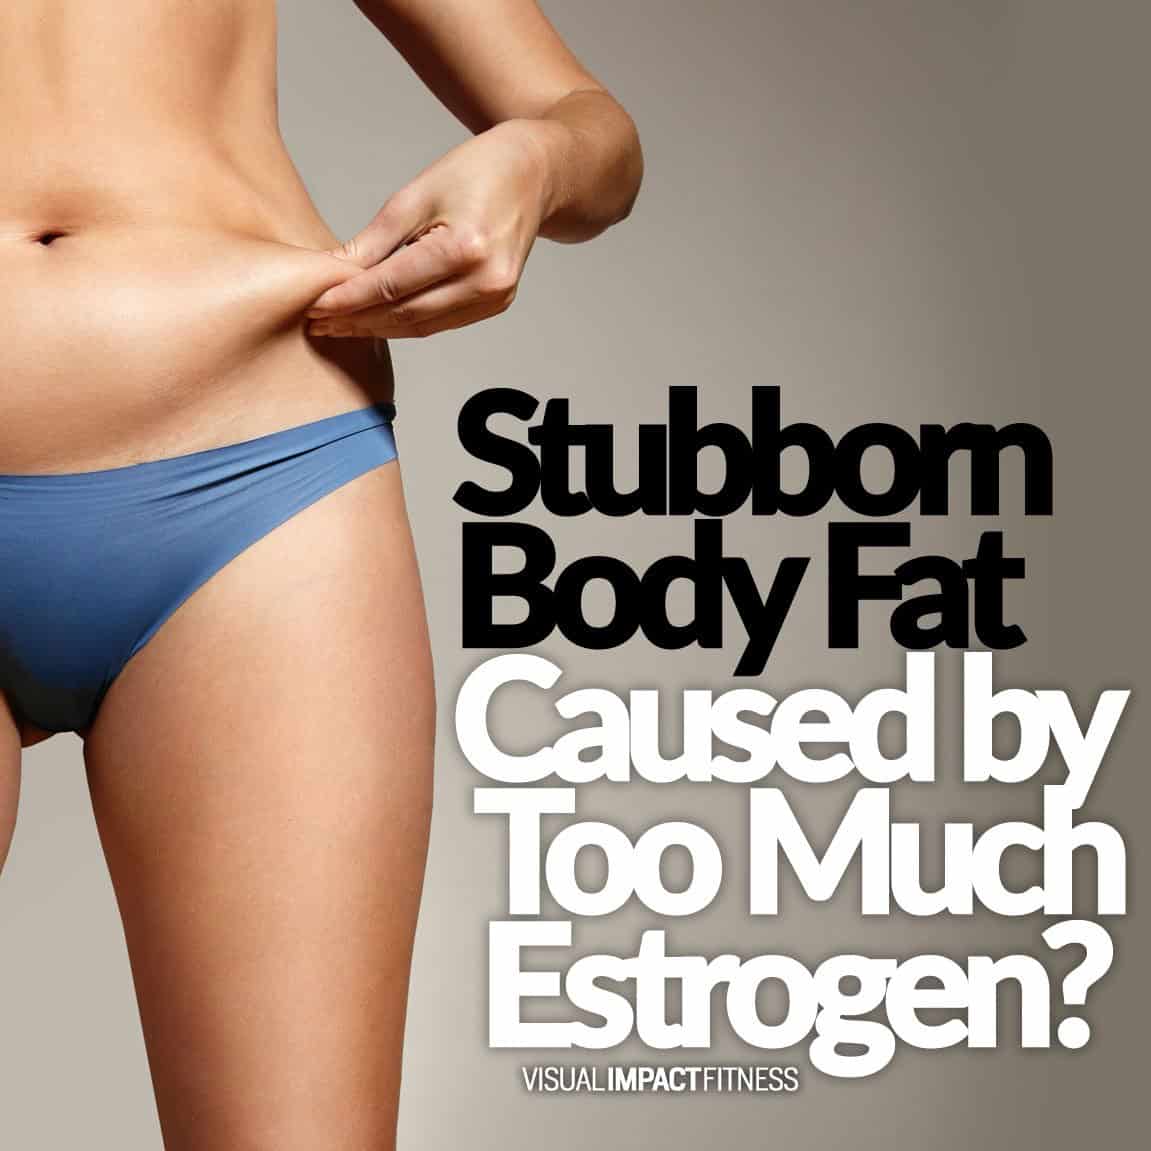 Stubborn Body Fat Caused by Too Much Estrogen?